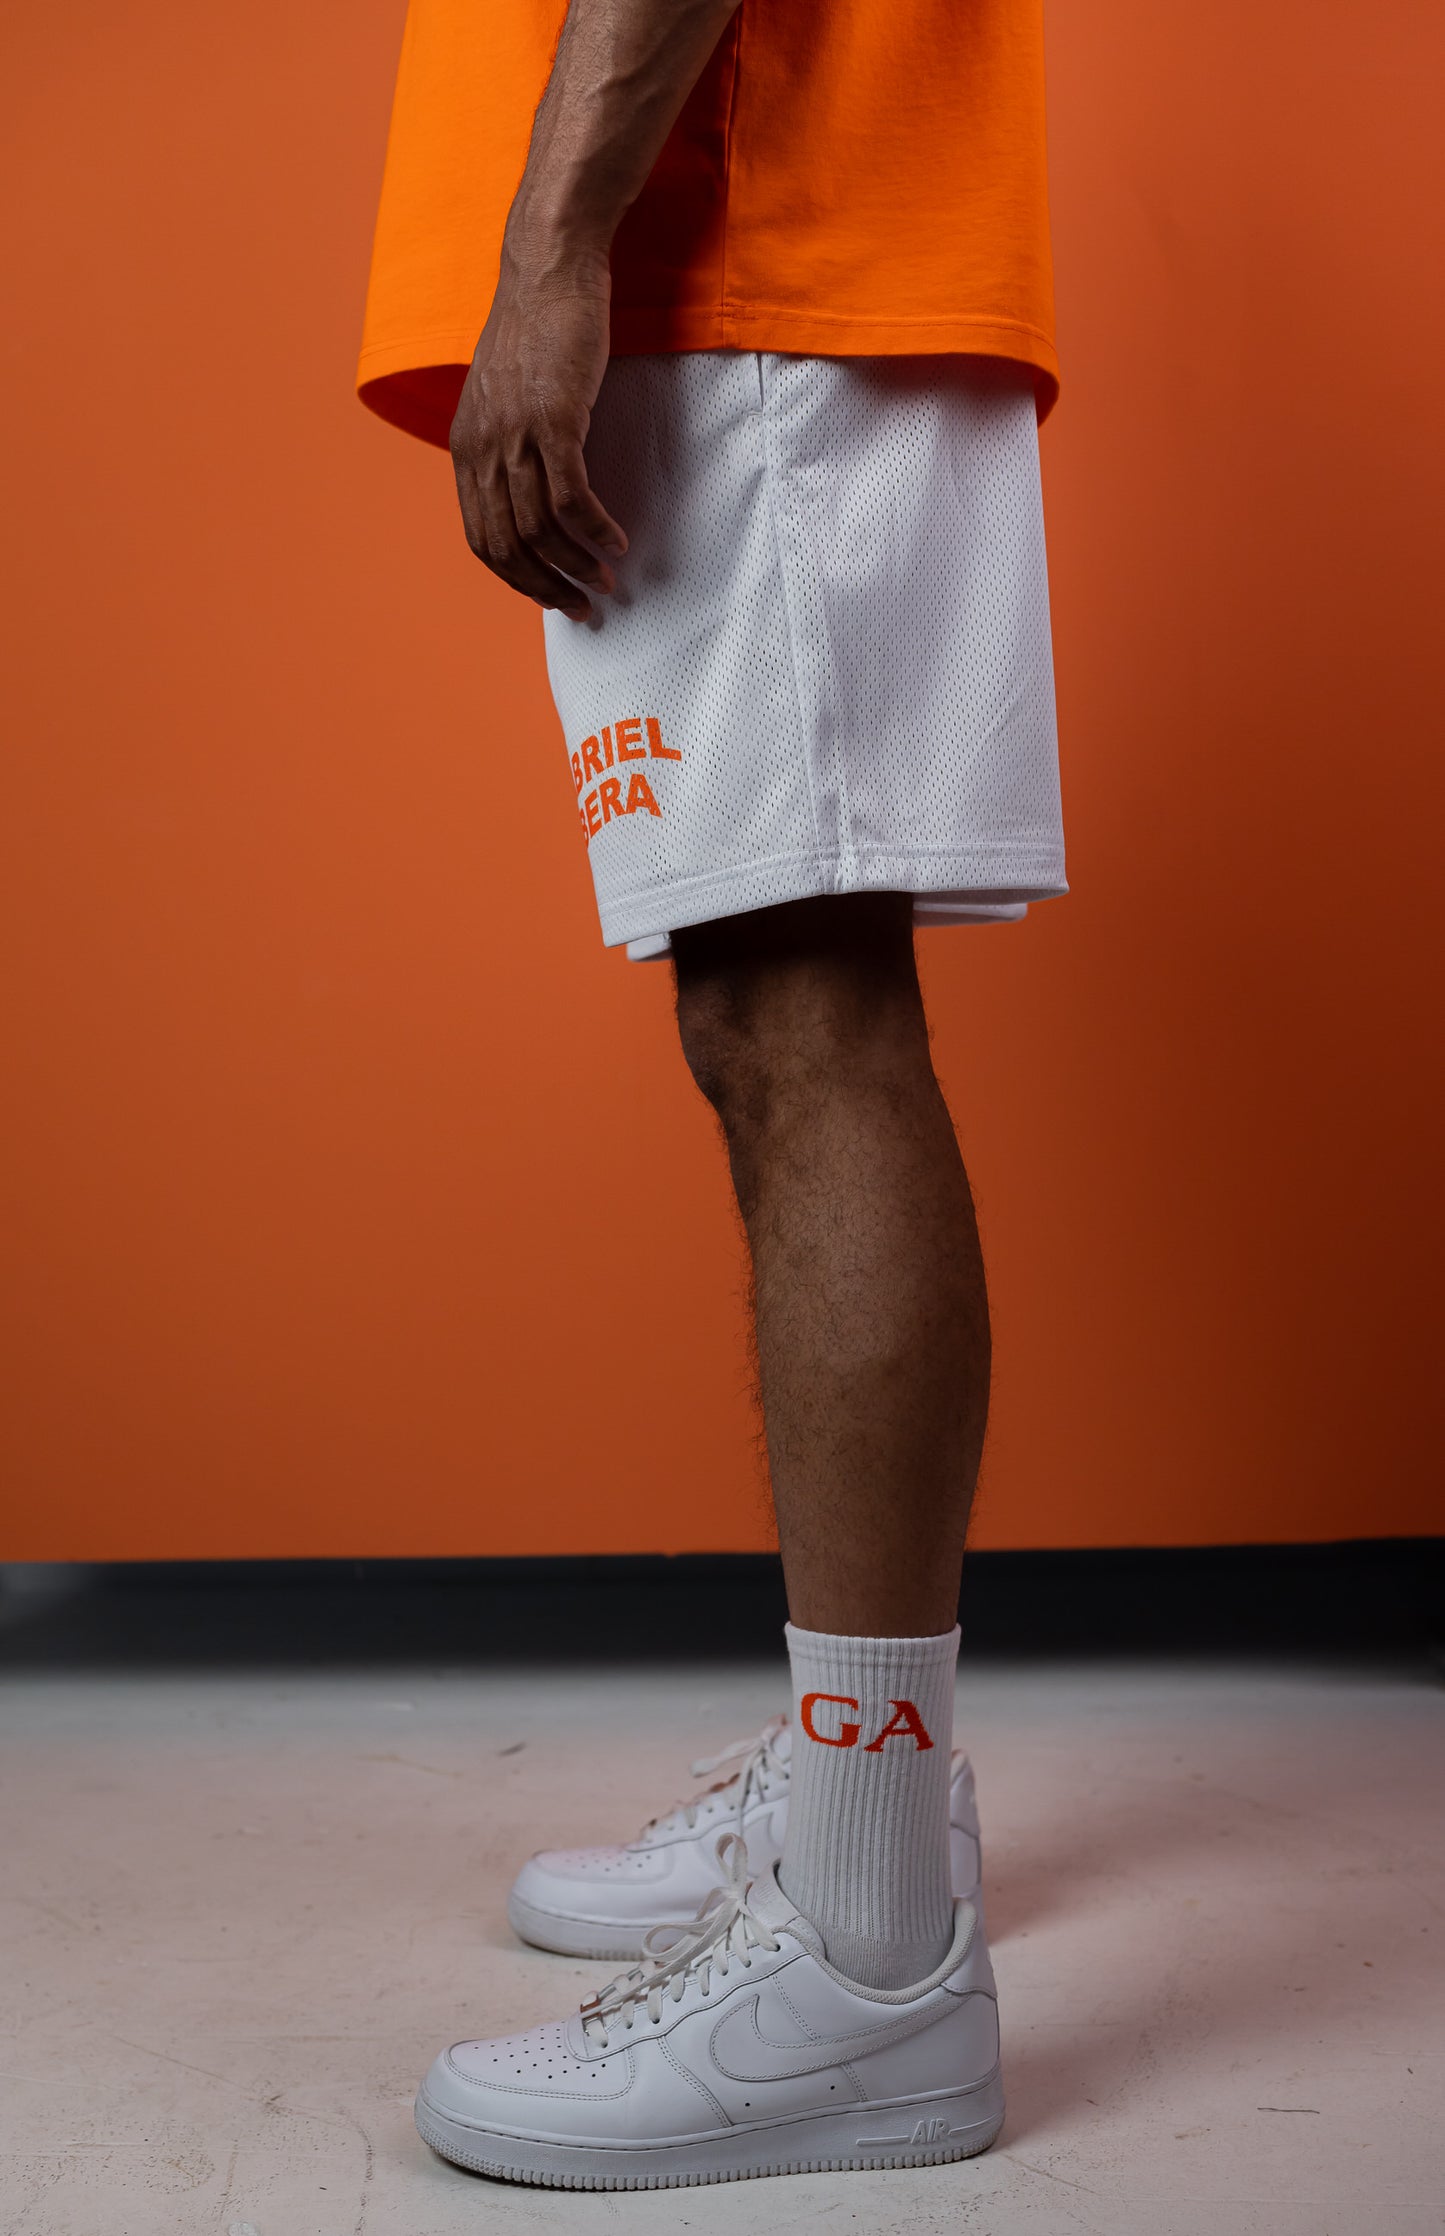 Model wearing a white mesh shorts with orange brand name print in the front